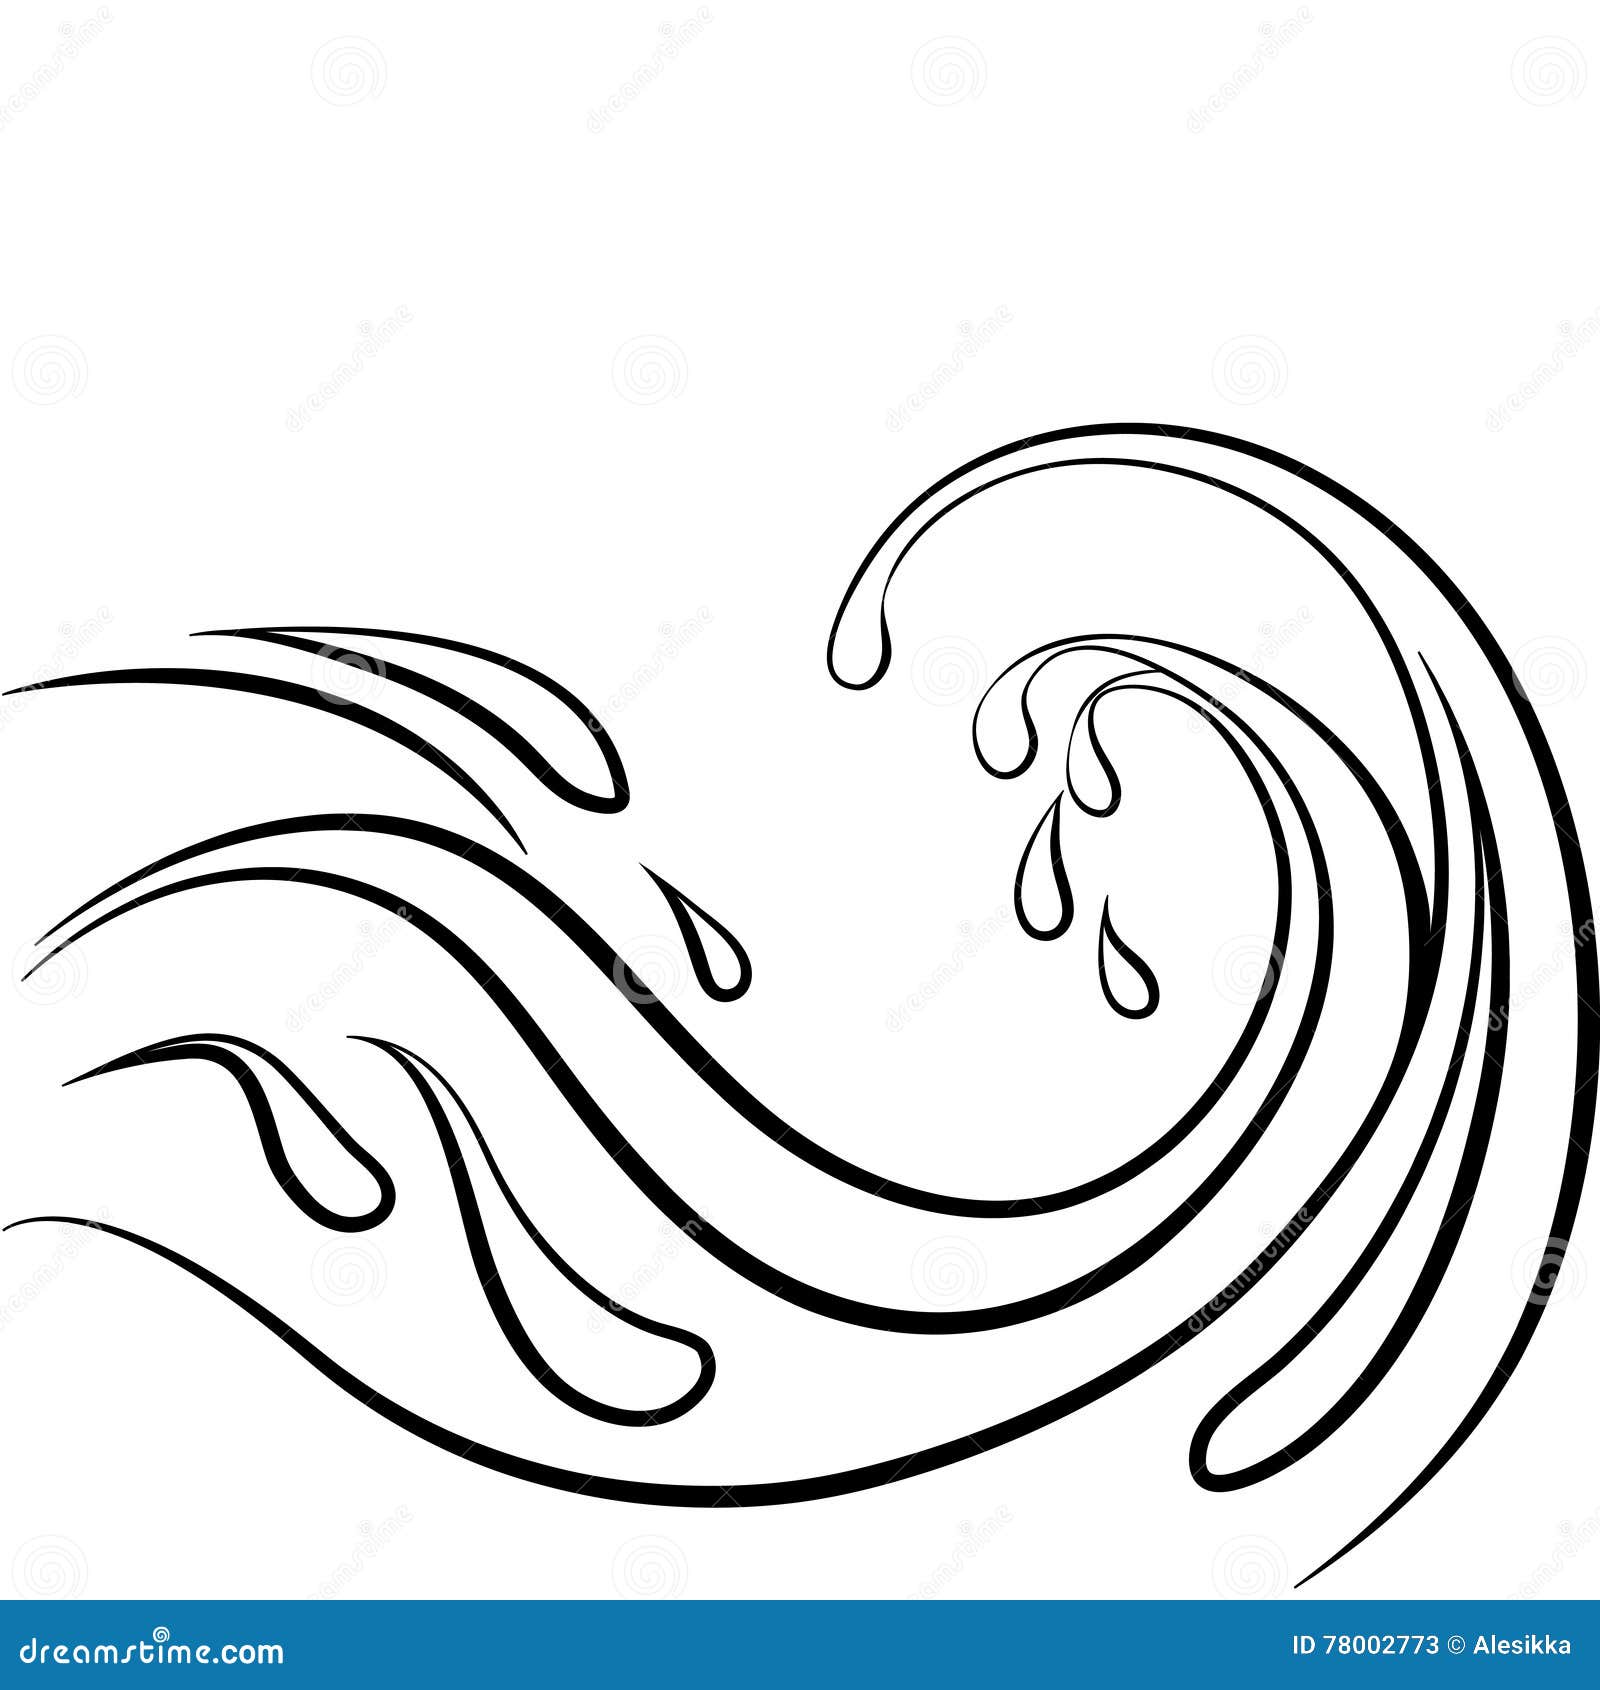 ocean waves clipart black and white - photo #44